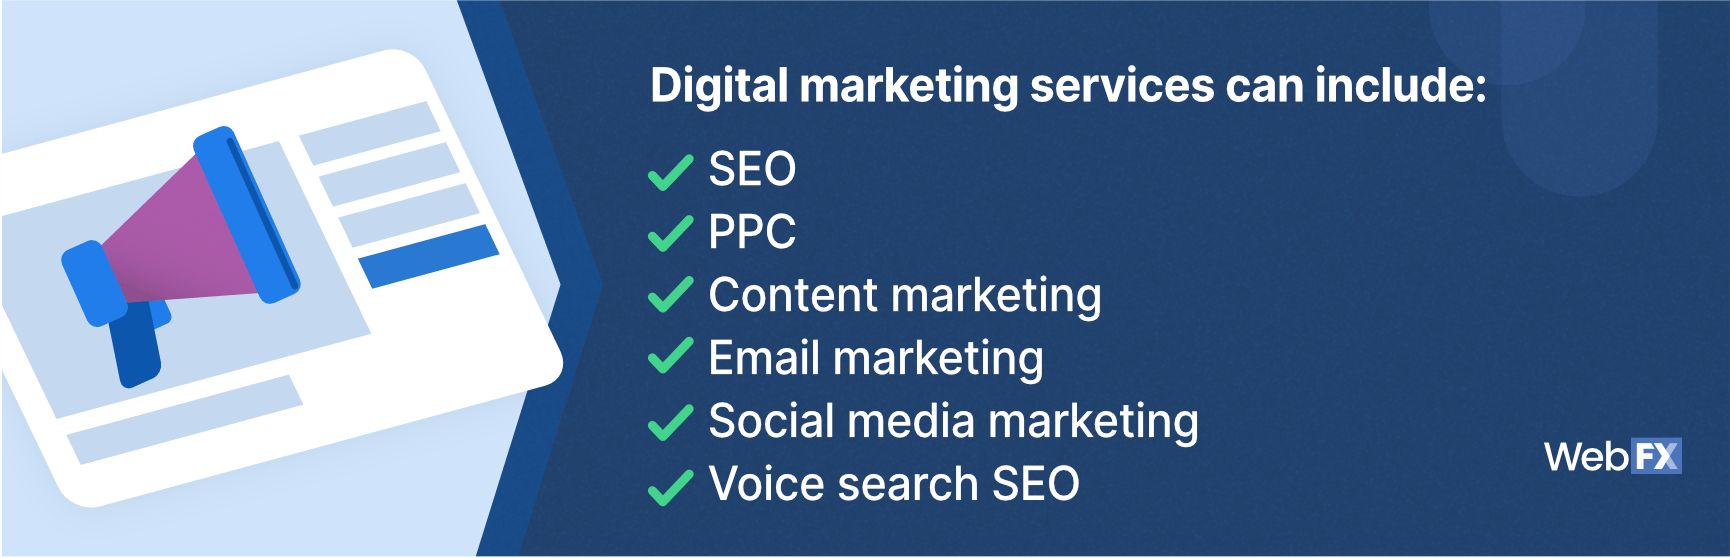 what digital marketing services can include